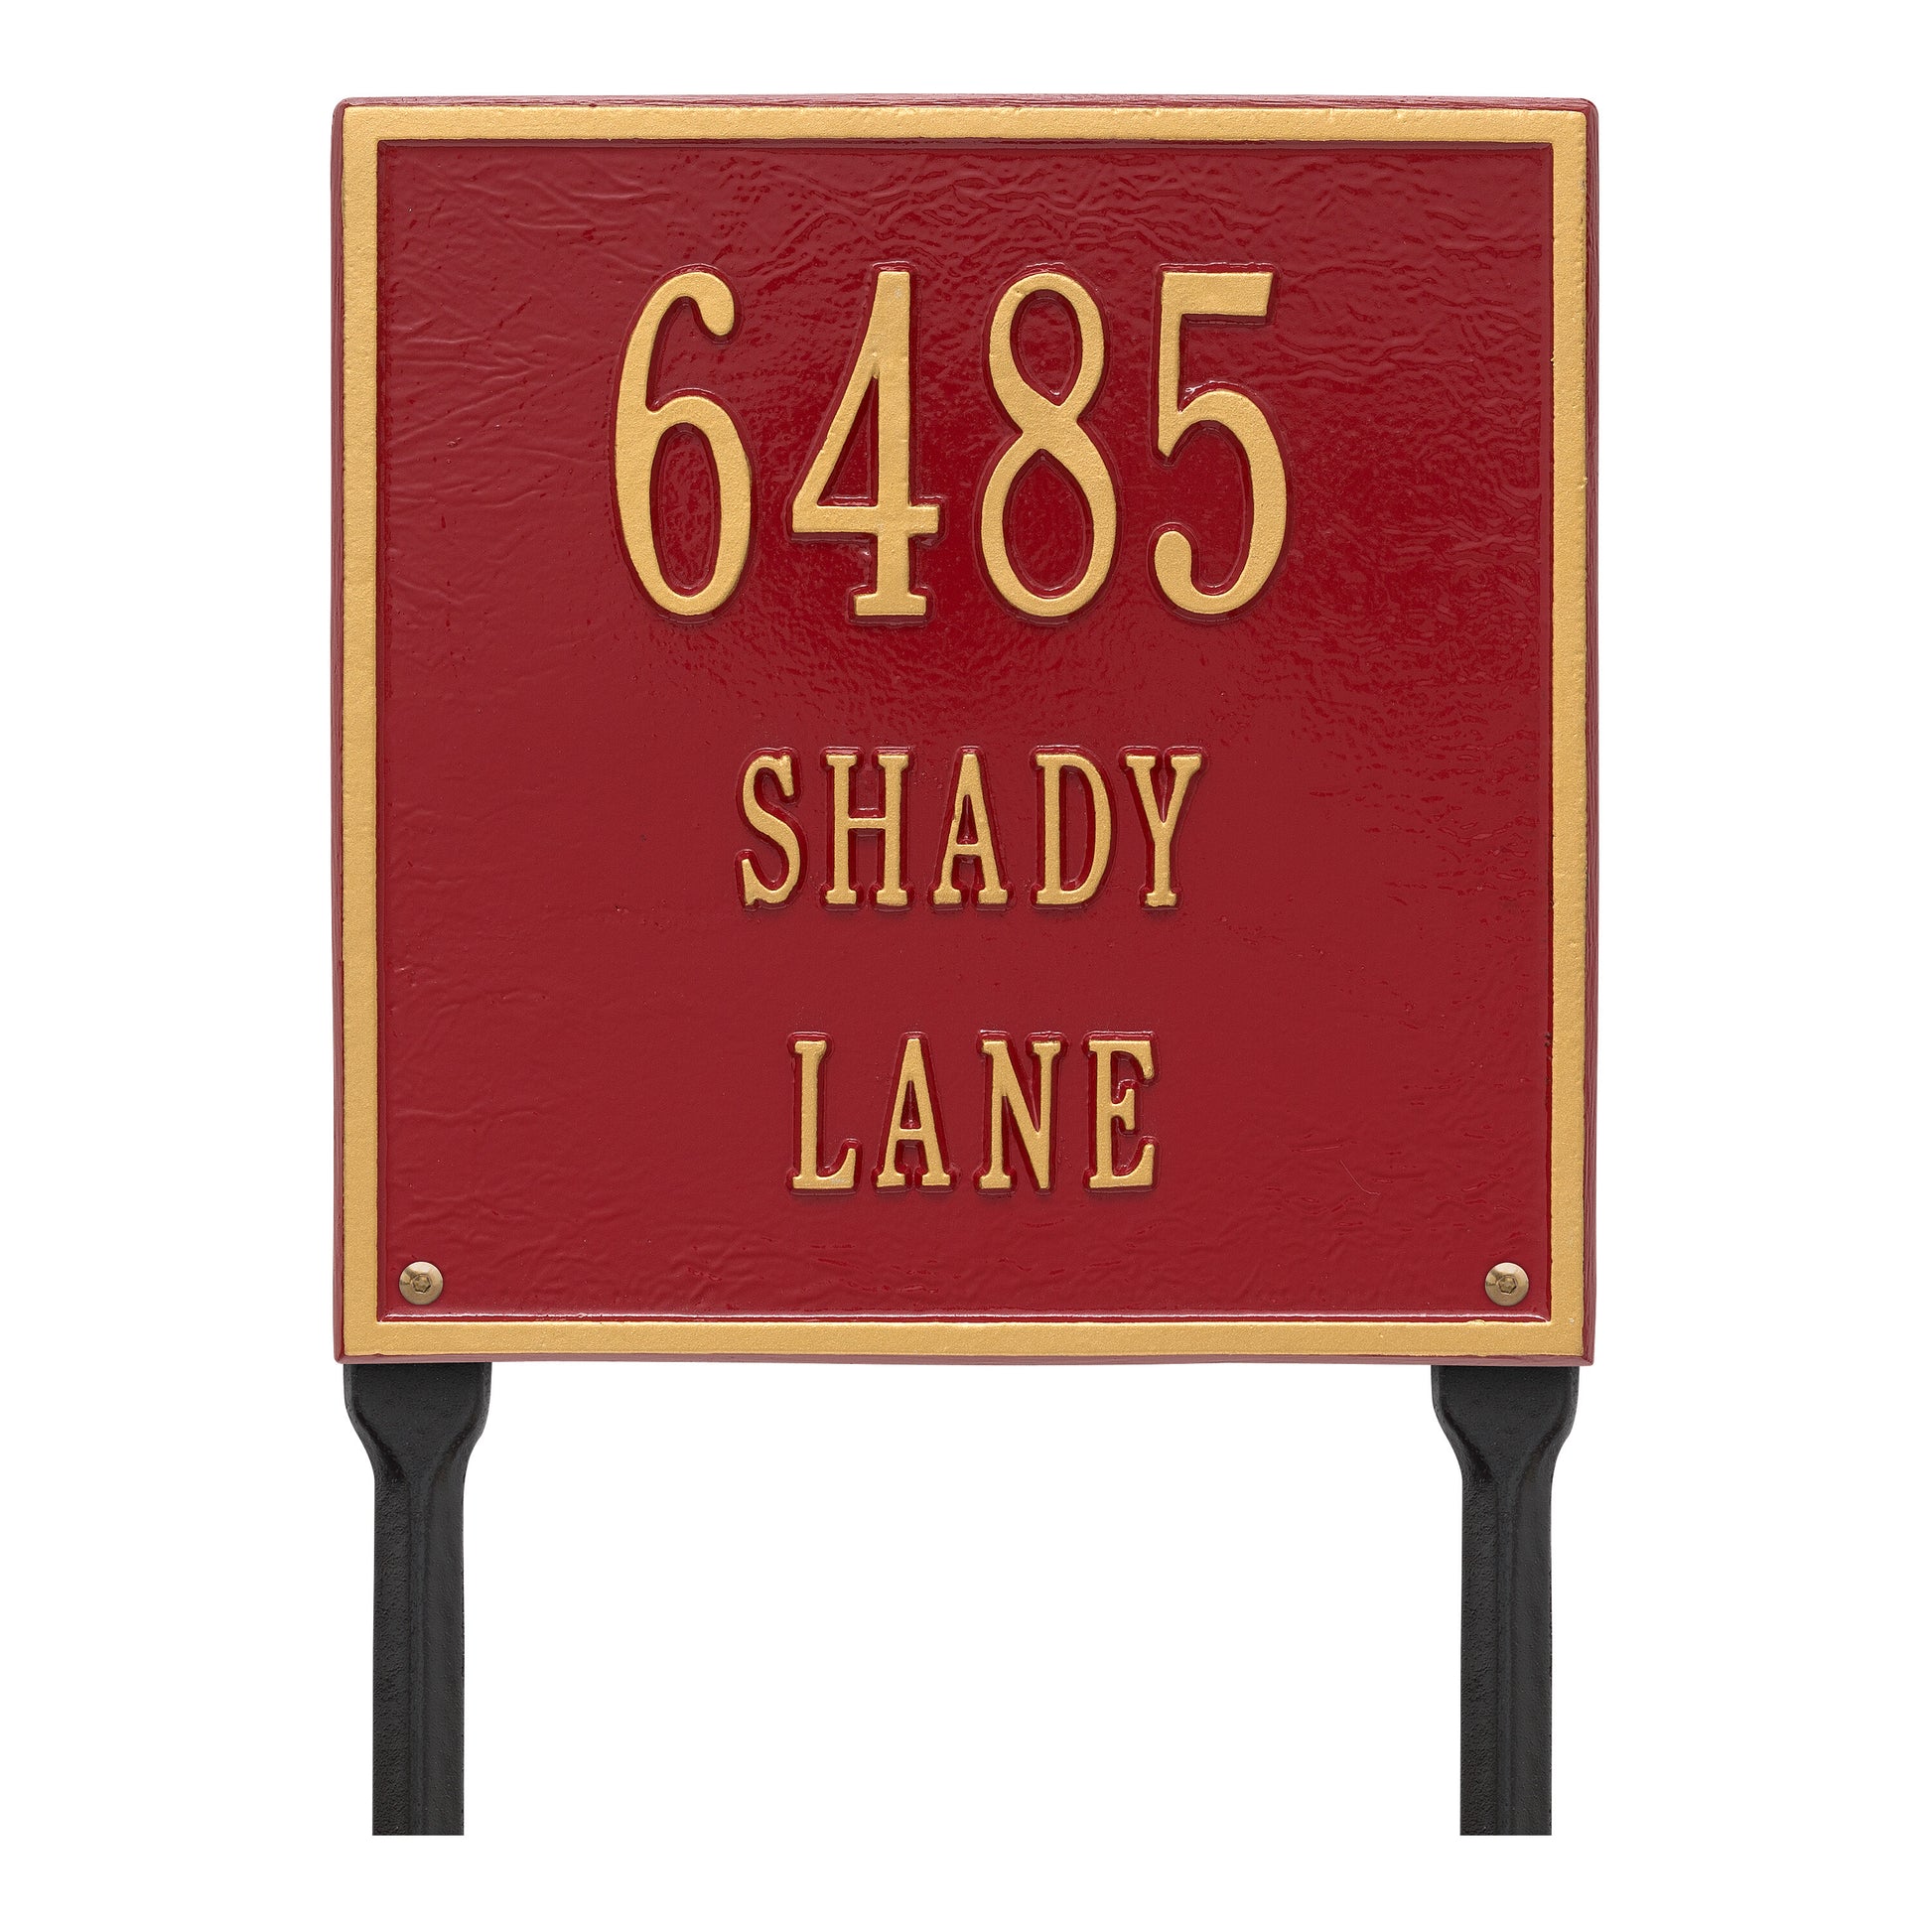 Whitehall Products Personalized Square Standard Lawn Plaque Three Line White/gold